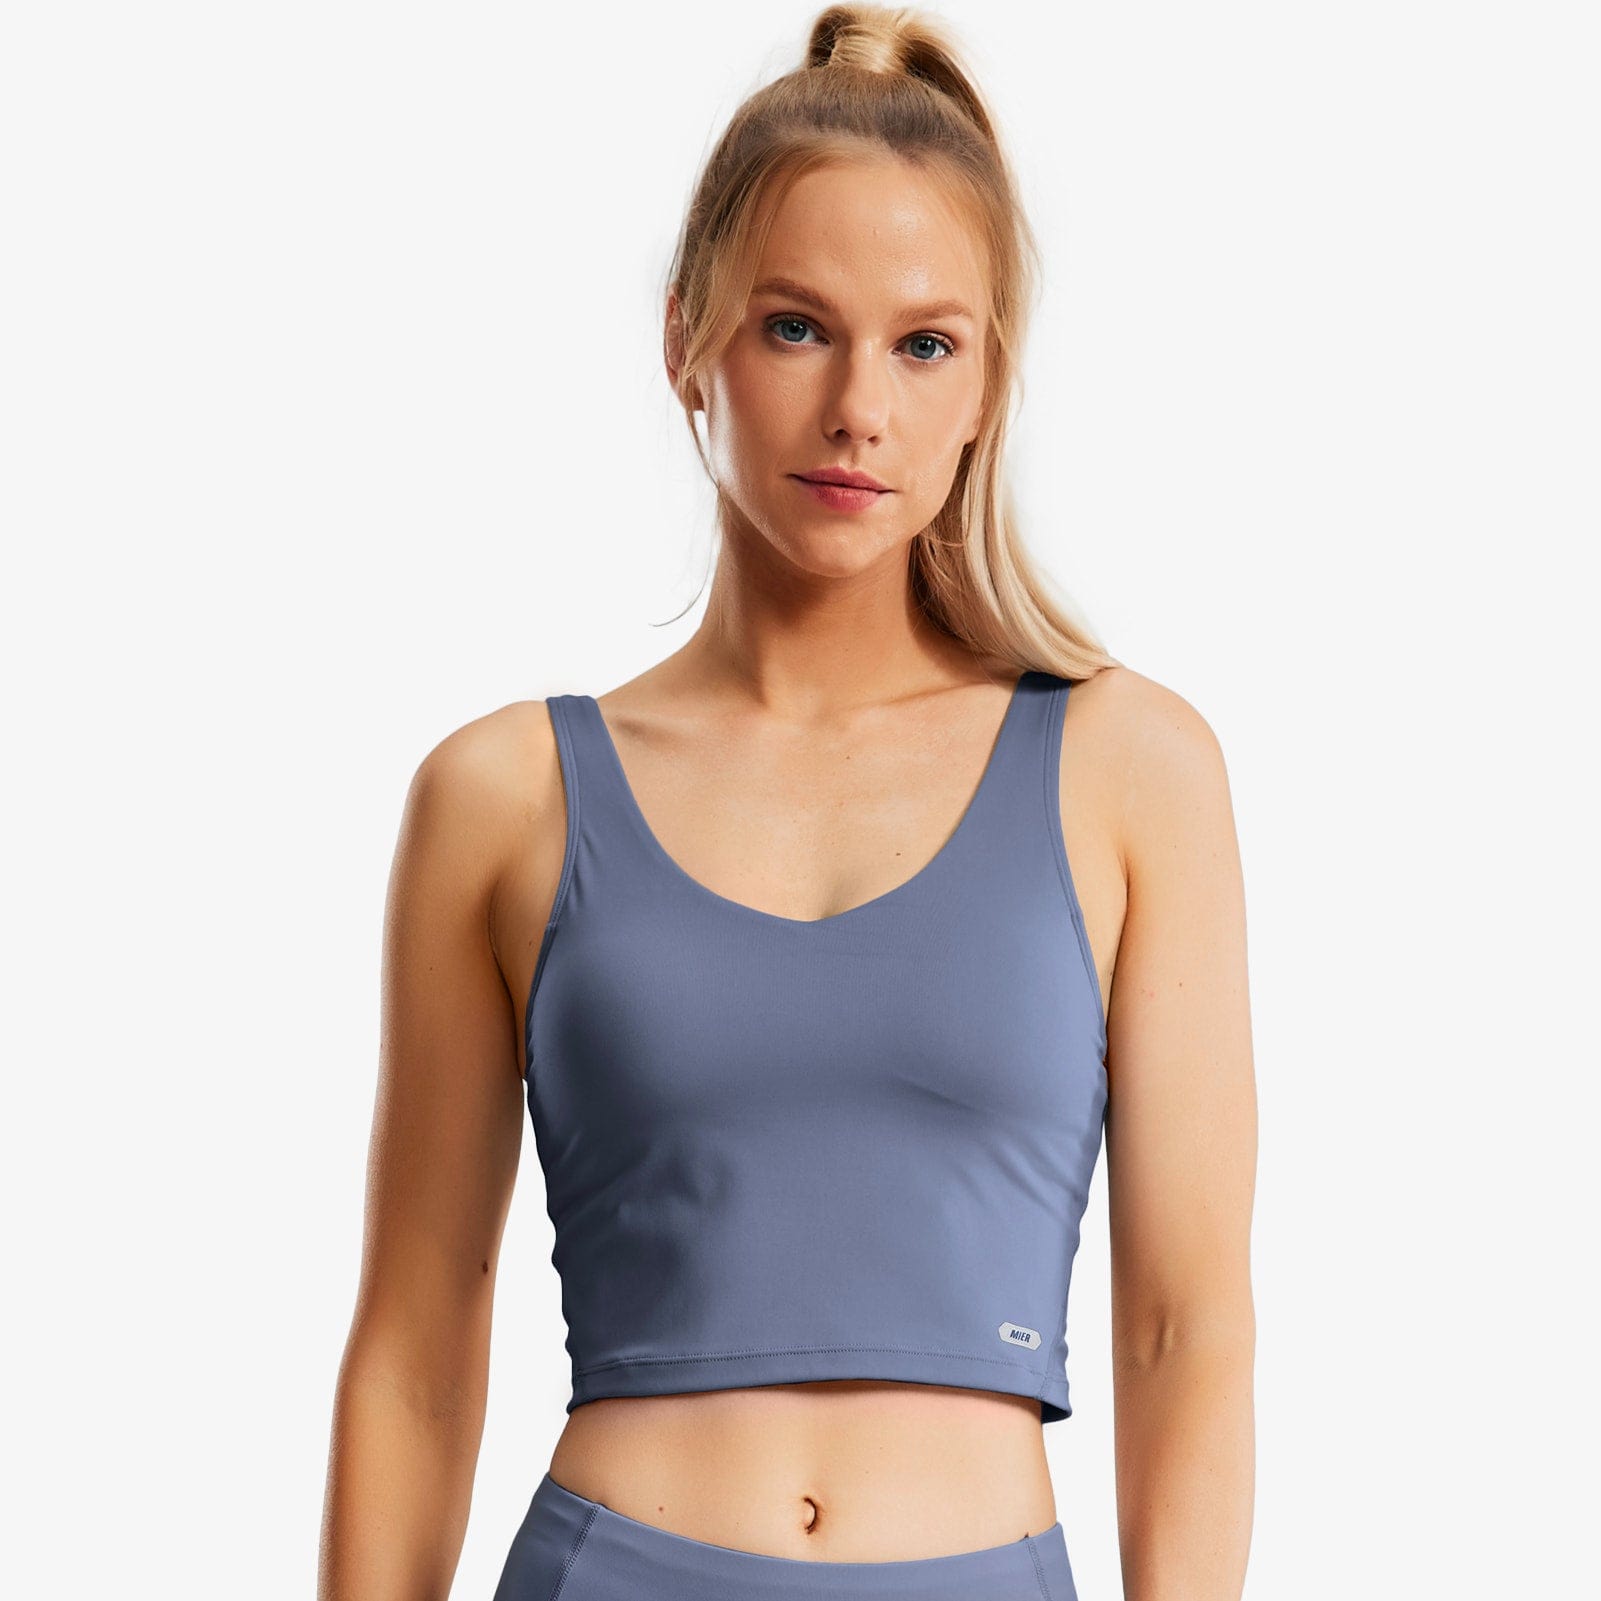 Women's Workout Tops, Athletic Shirts & Activewear